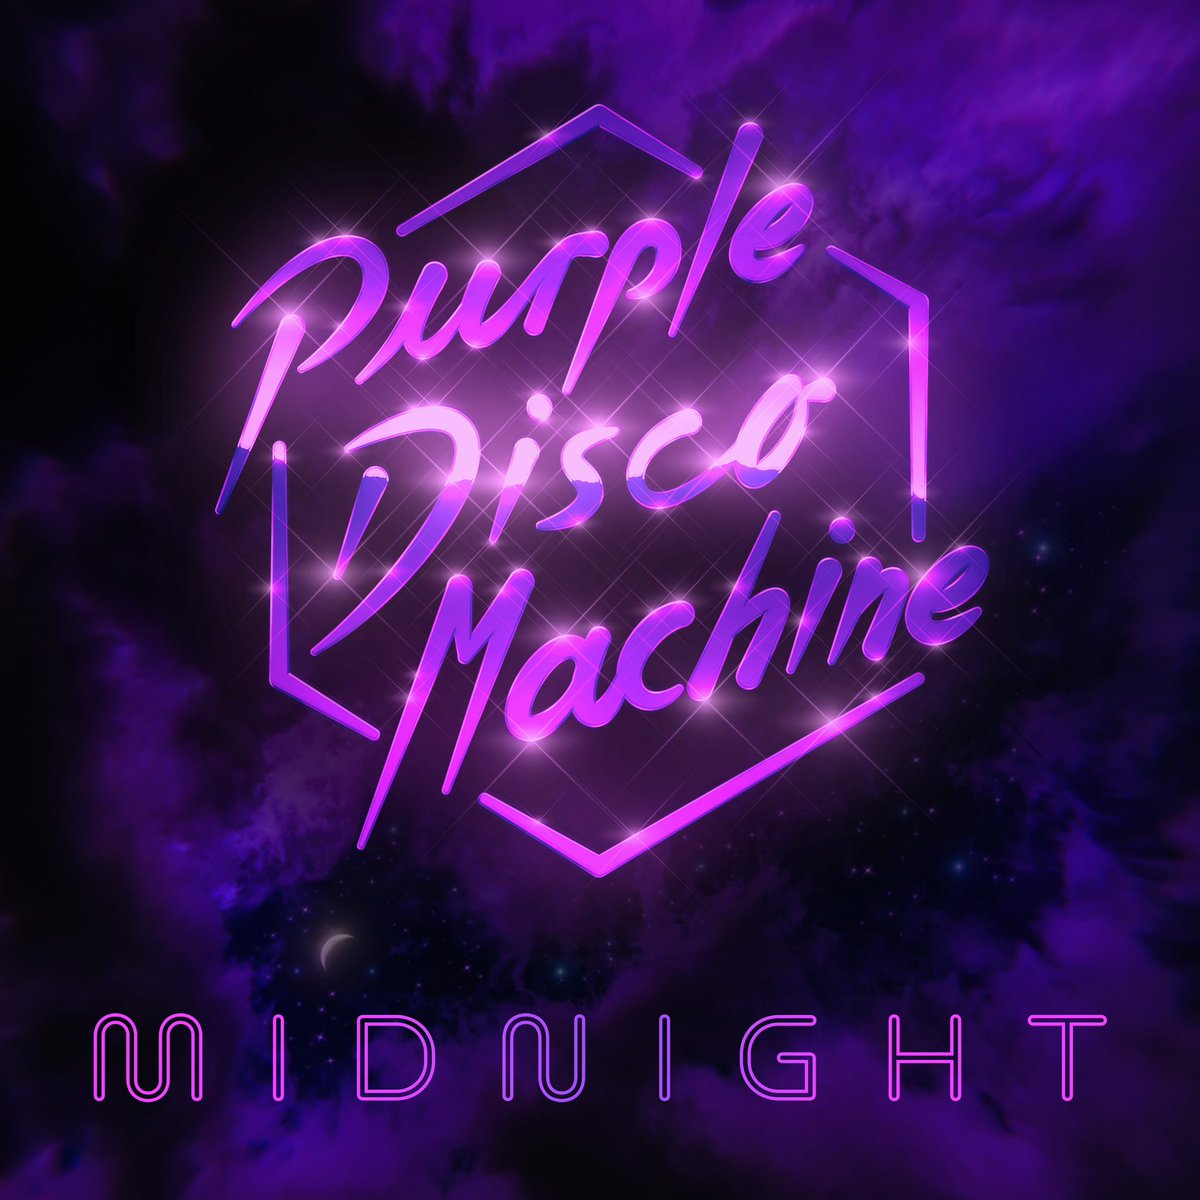 My new exclusive @AppleMusic mix is out today, called MIDNIGHT 🌚✨ Hope you enjoy it, would love to hear what you think! 💜 apple.co/3JpqLdj